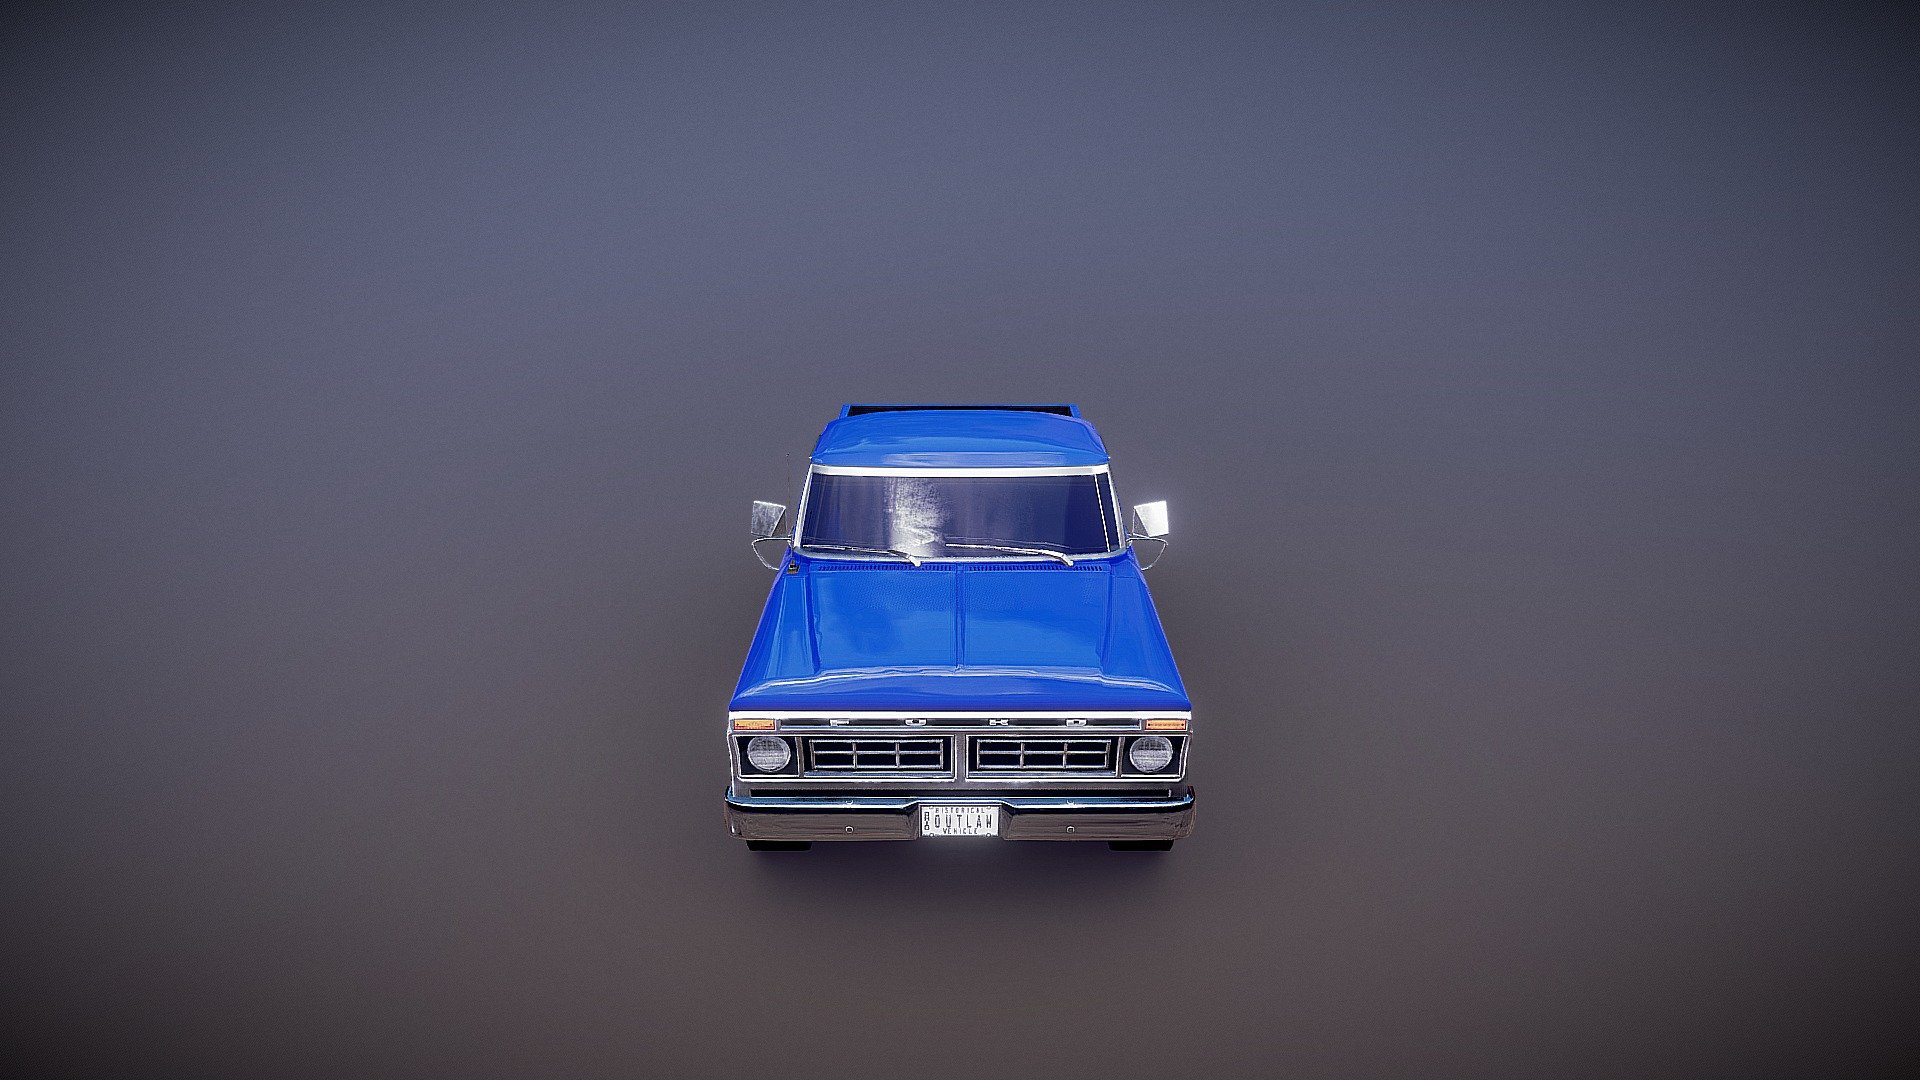 Hi.  Modeled with Maya.  Textured with Substance Painter.  Thanks for looking.  Please let me know what you think! - 1976 F150 Long Wheel Base - Download Free 3D model by DJackson362 3d model